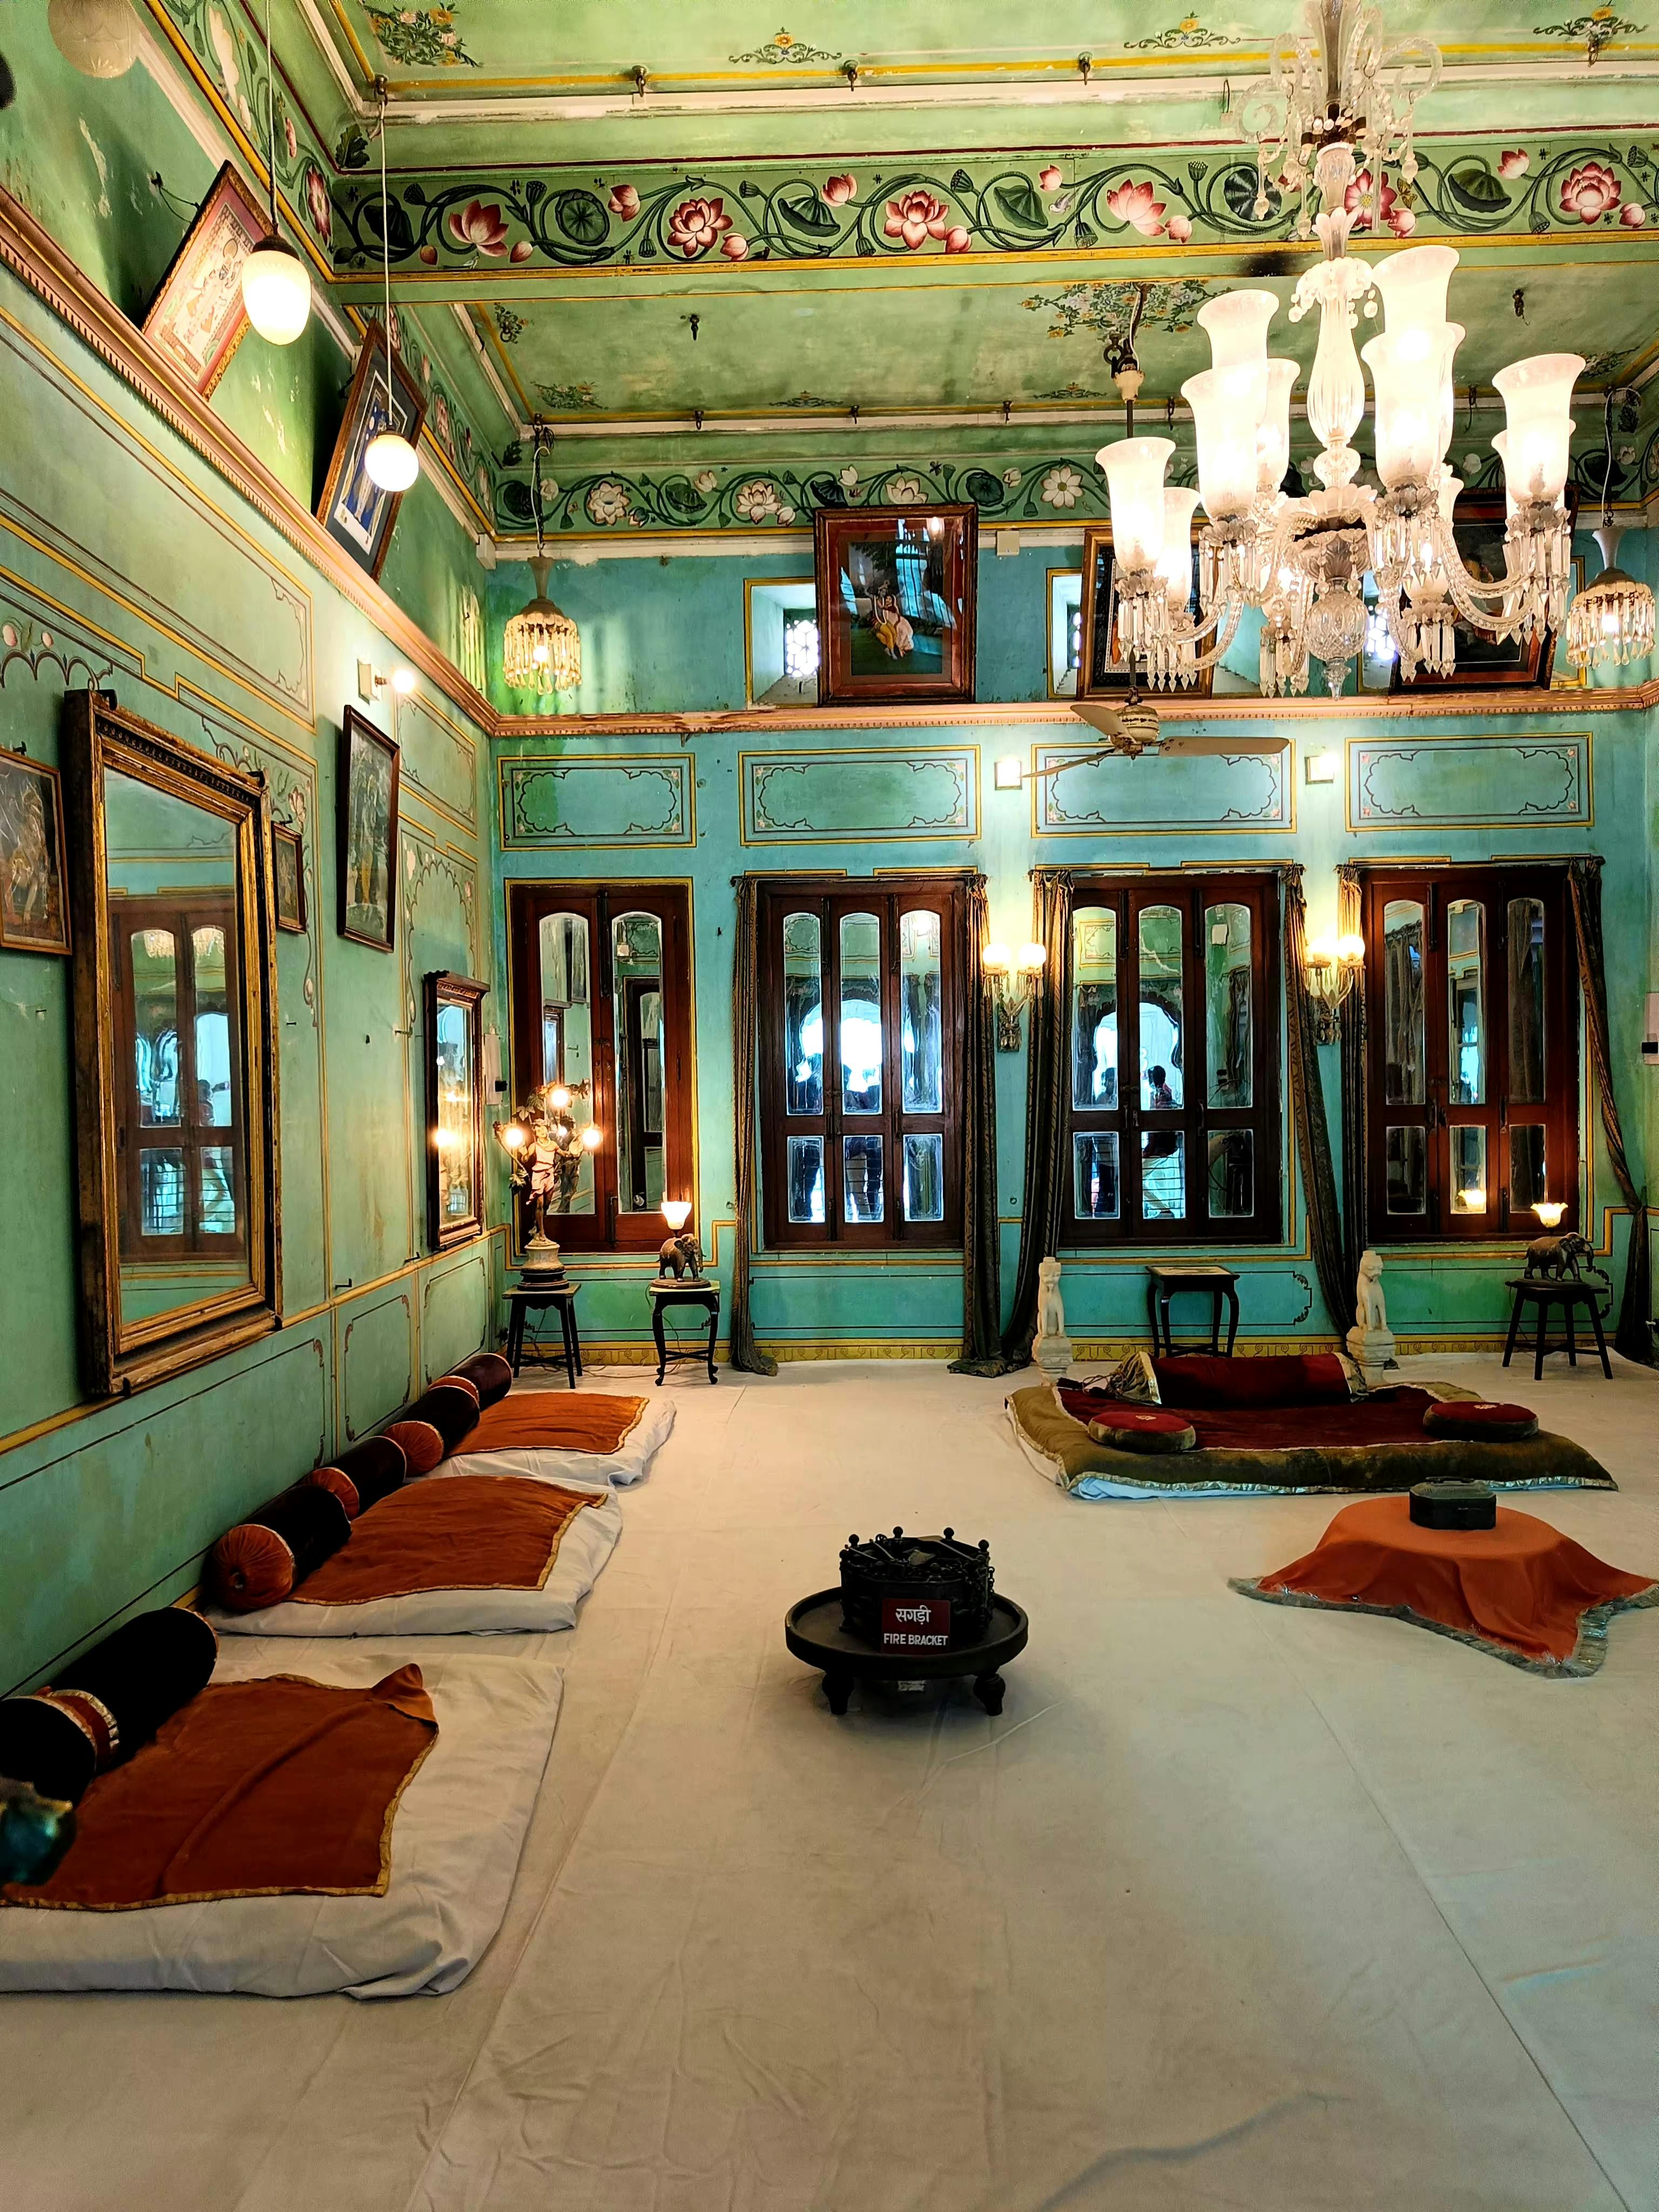 Aggregate 71+ udaipur palace interior best